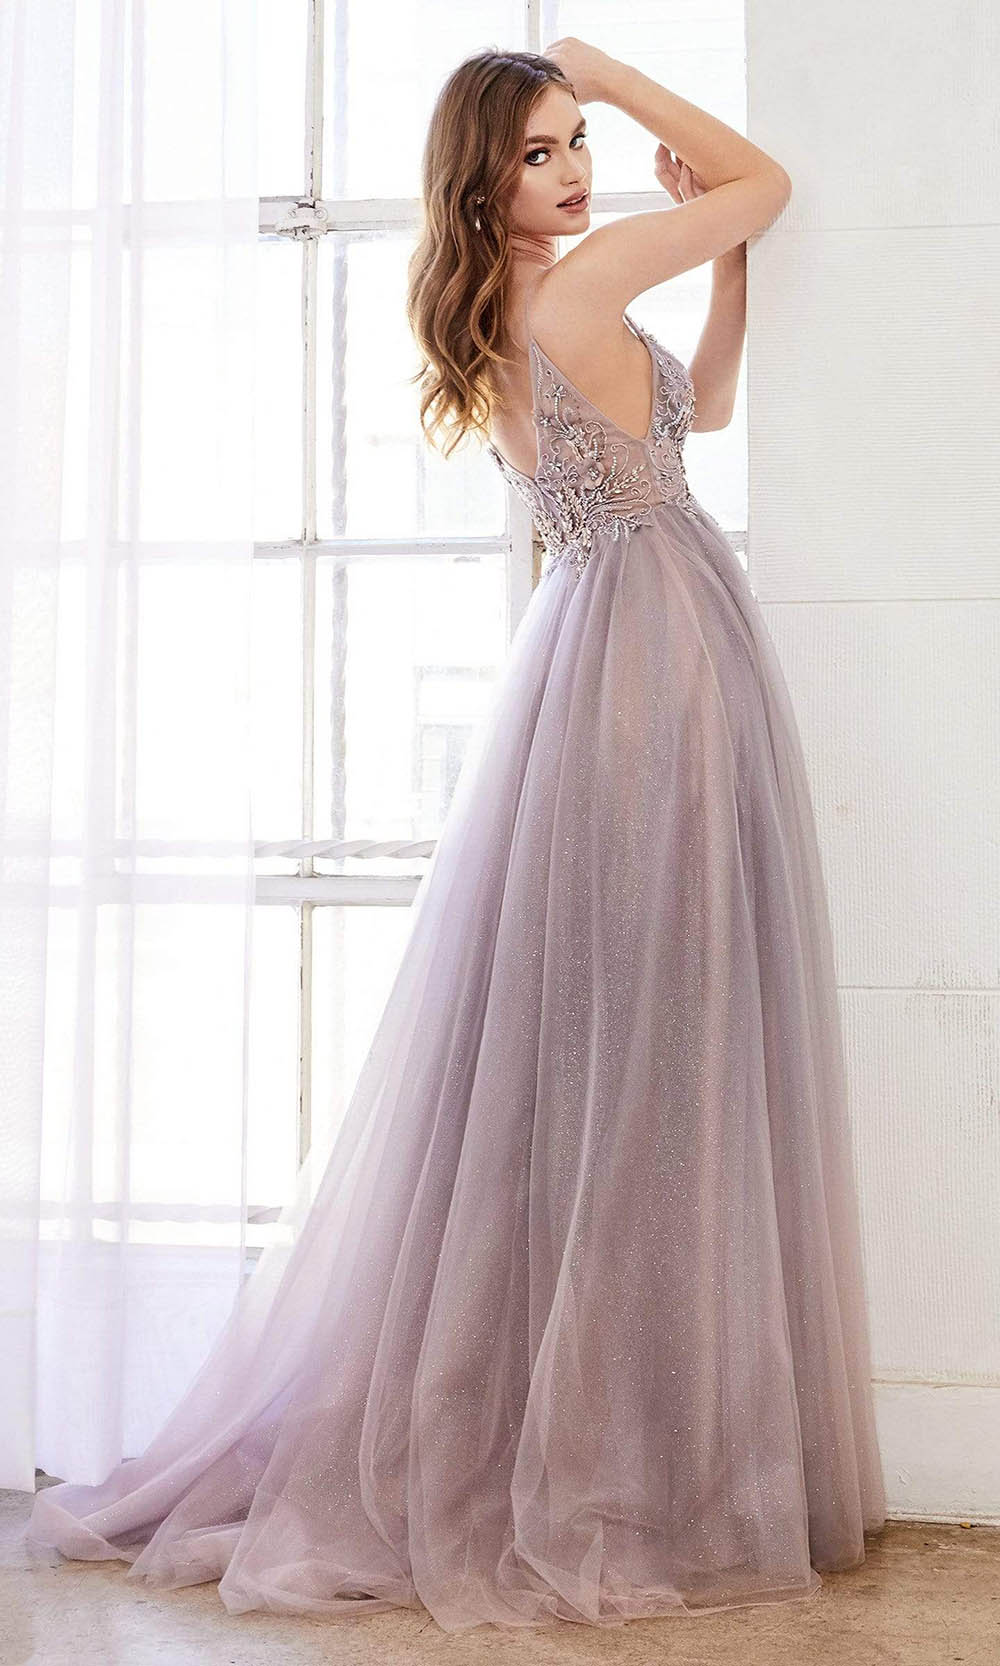 Andrea and Leo - A0850 Embellished Romantic Glittered Gown In Purple and Gray